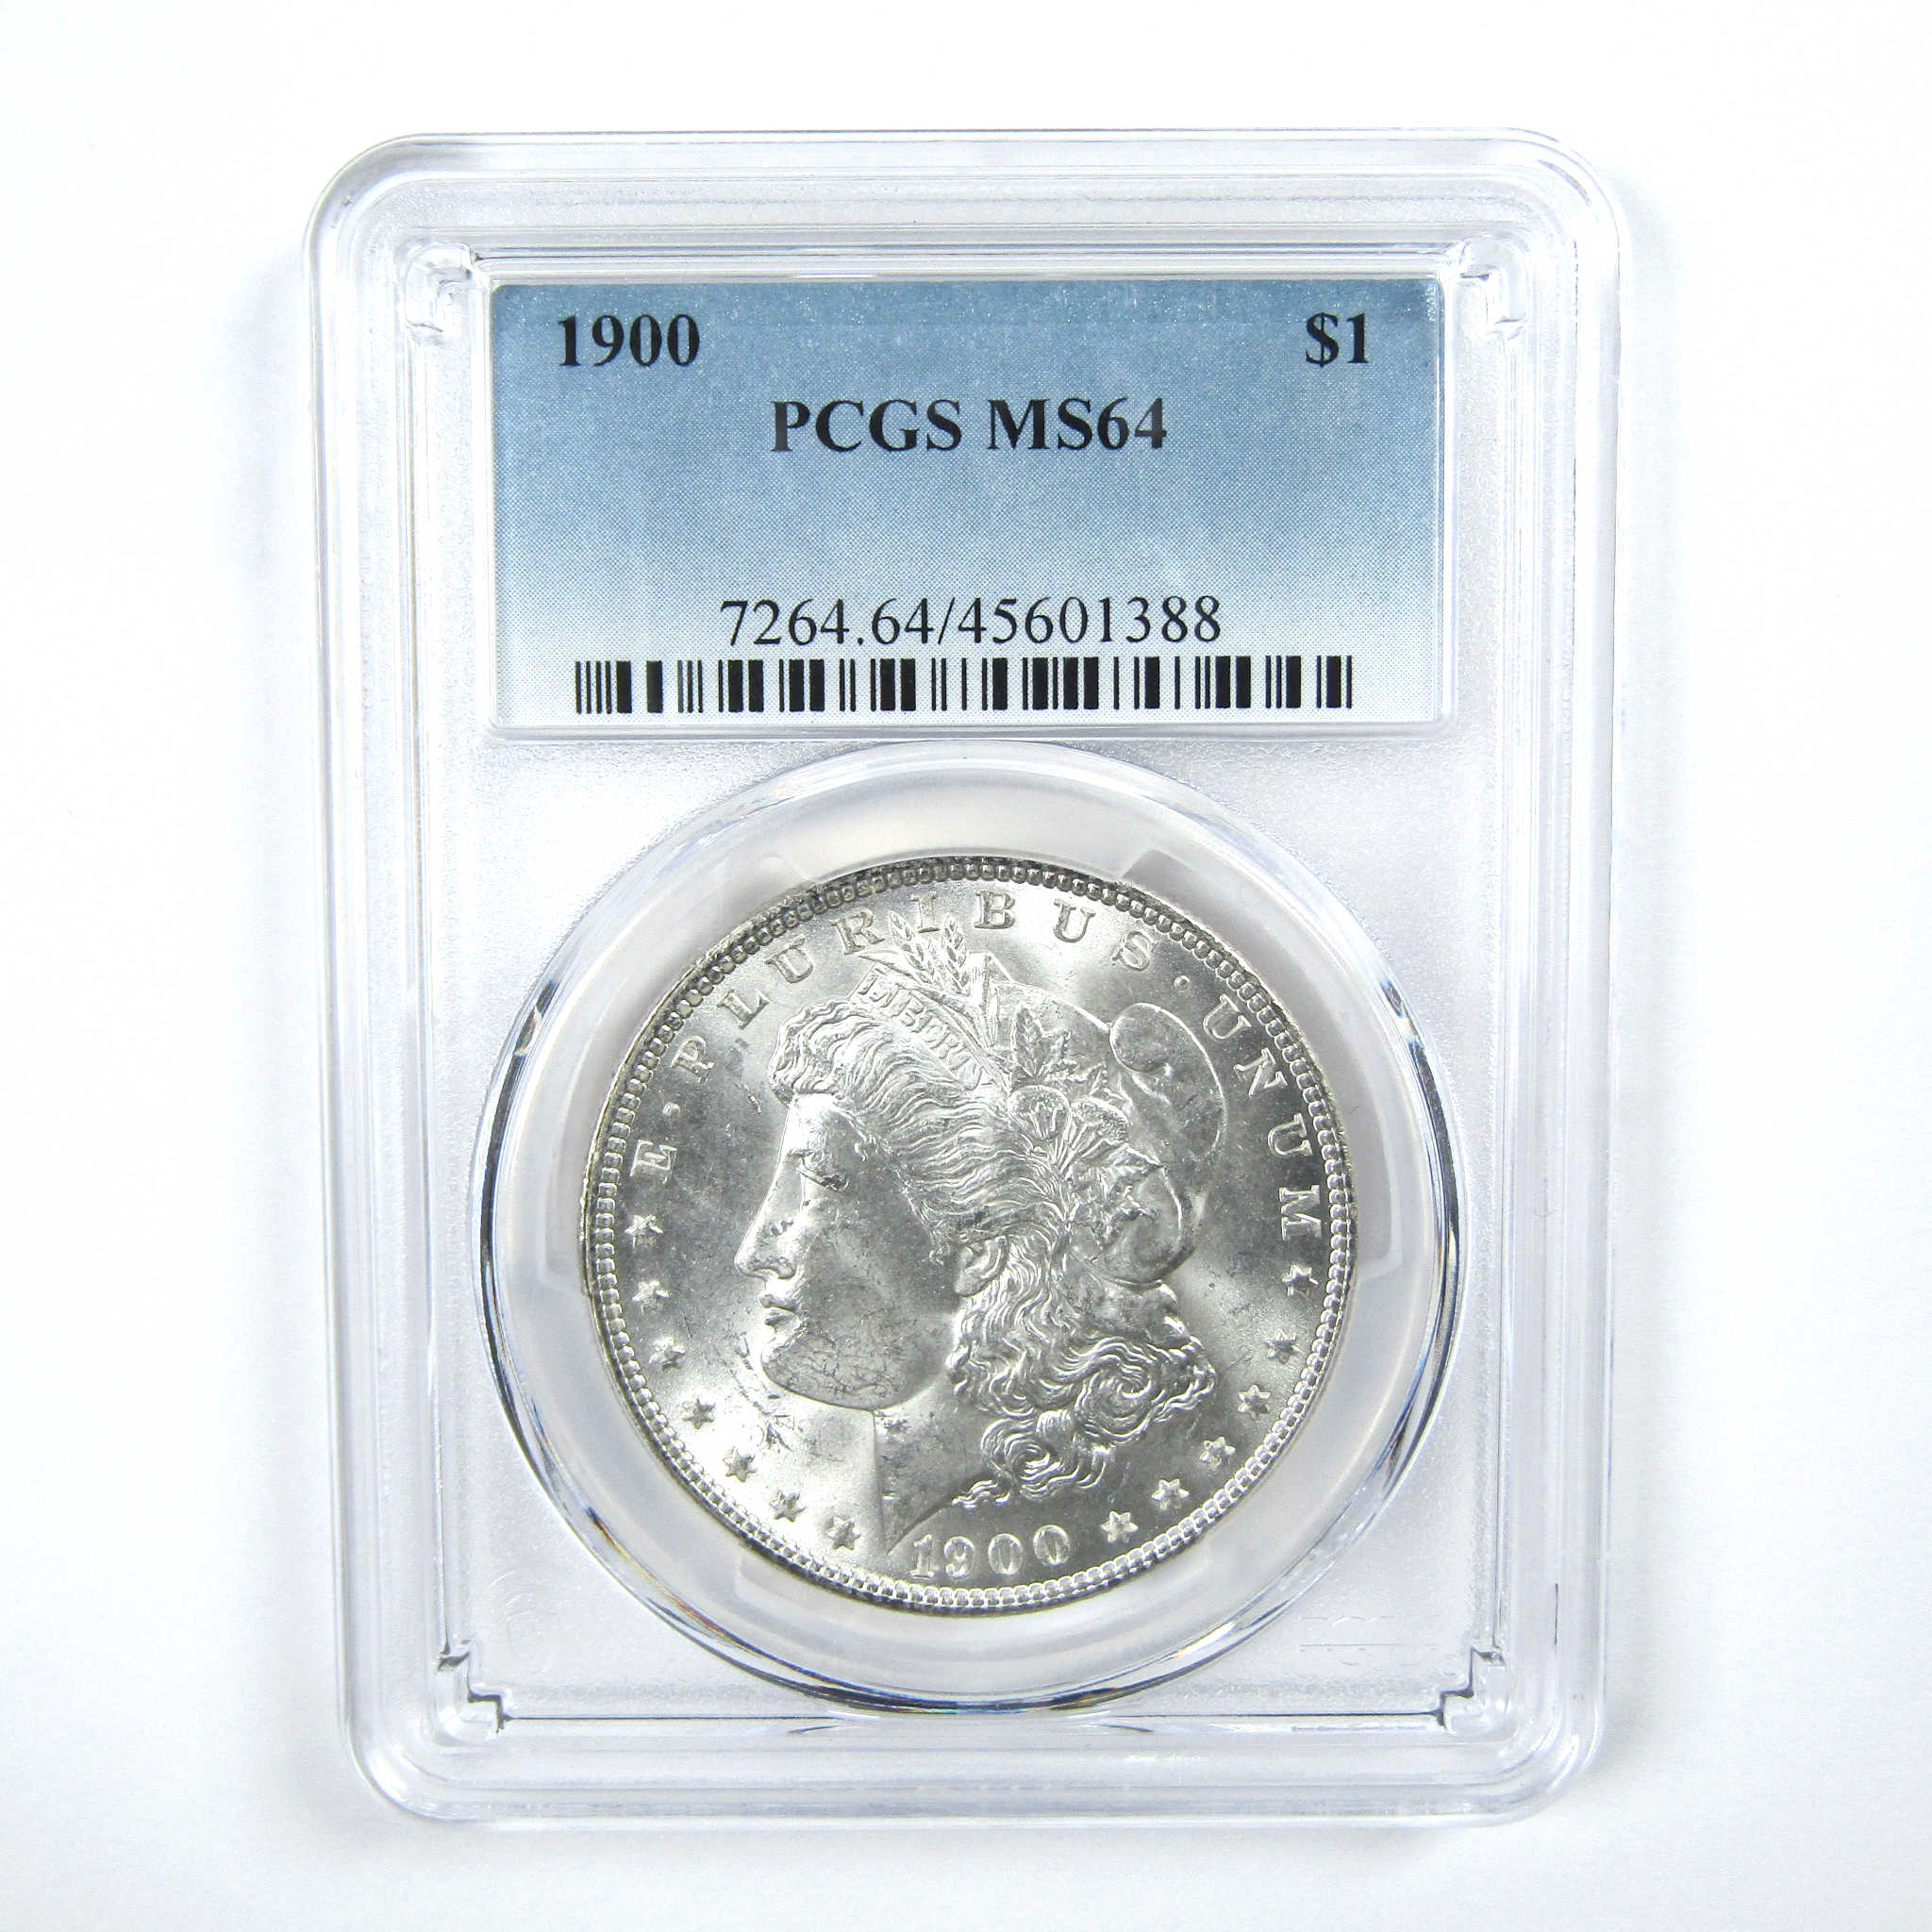 1900 Morgan Dollar MS 64 PCGS Silver $1 Uncirculated Coin SKU:I13768 - Morgan coin - Morgan silver dollar - Morgan silver dollar for sale - Profile Coins &amp; Collectibles